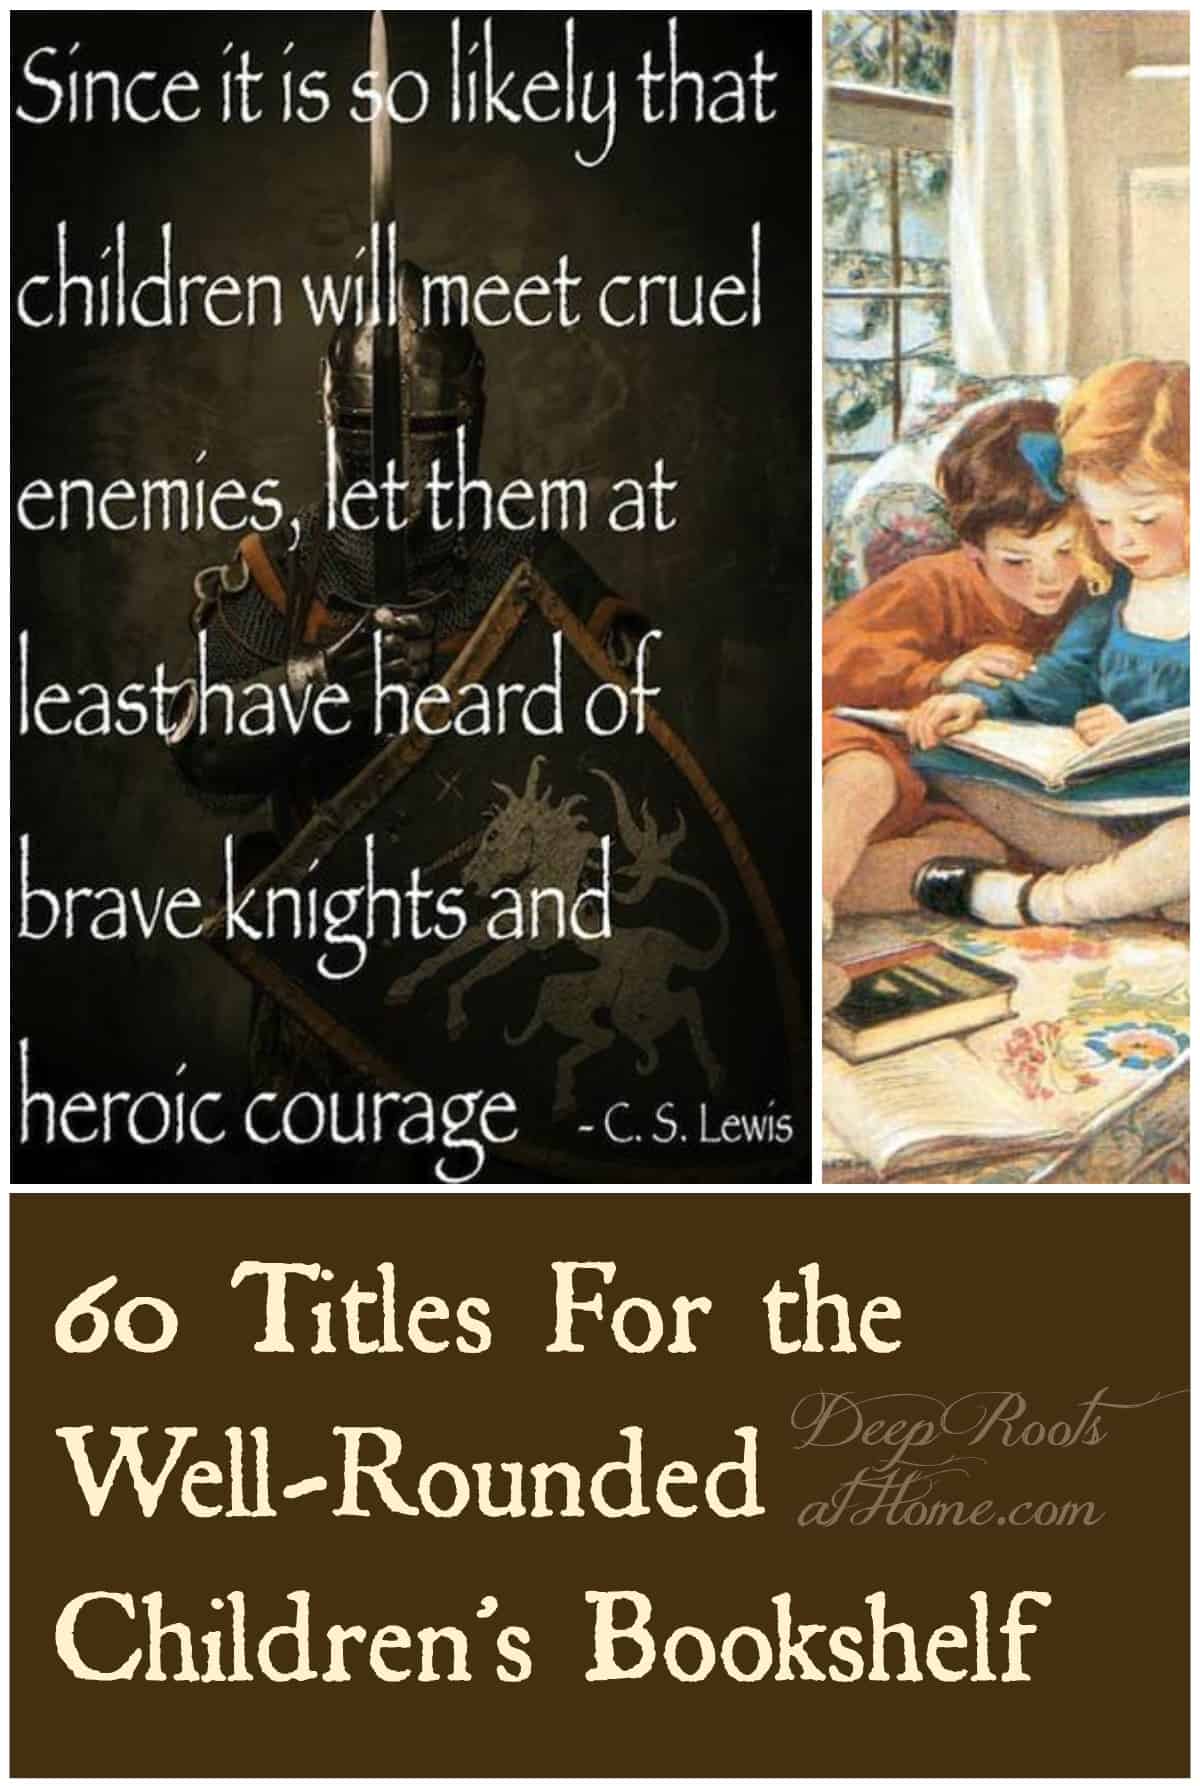 60 Titles For the Well-Rounded Children's Bookshelf. Children reading and CS Lewis quote in a Pinterest image.